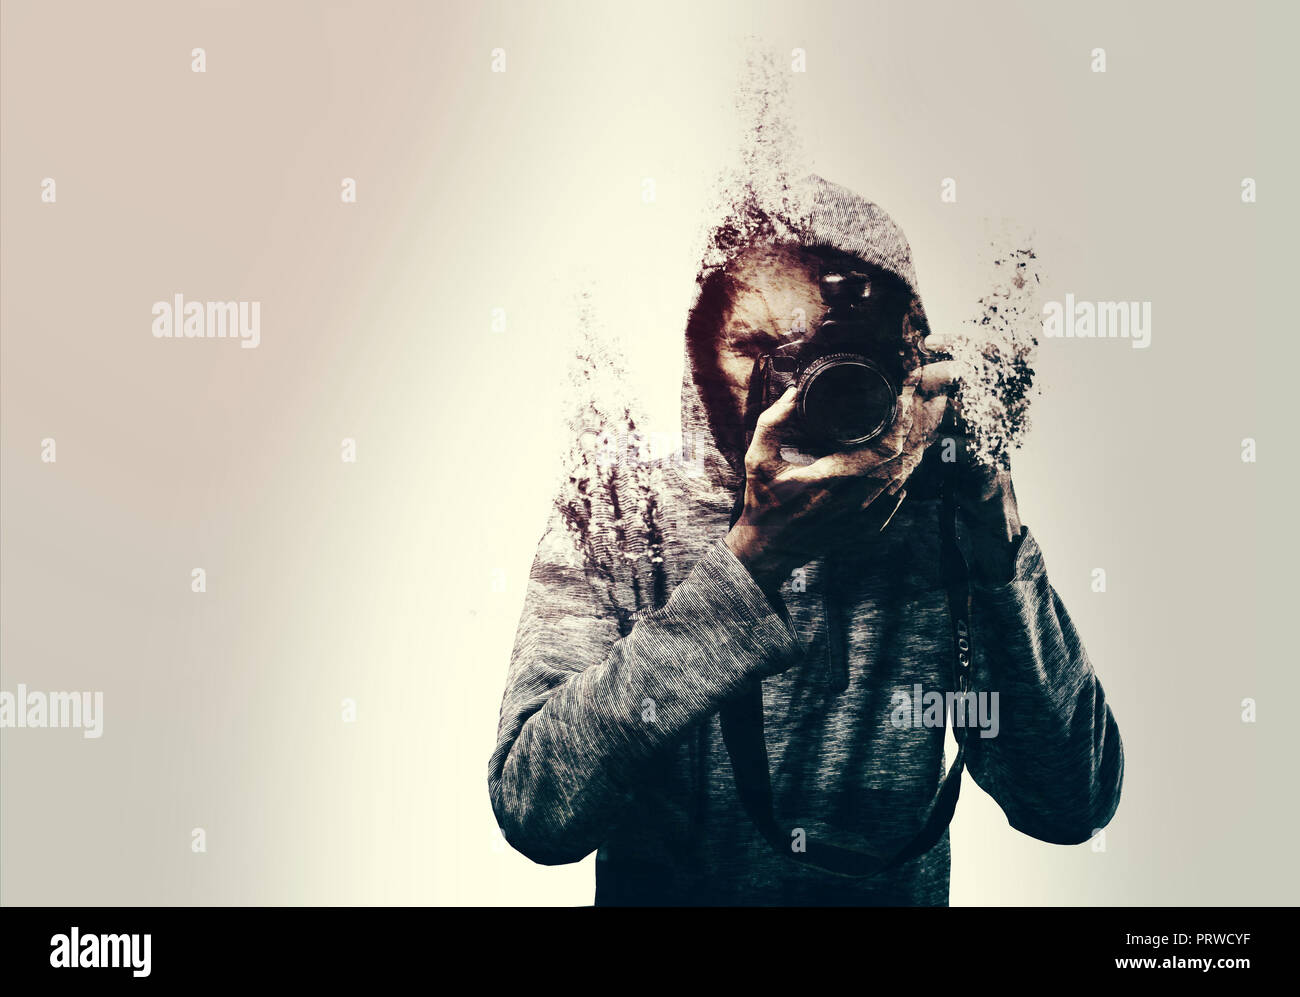 Abstract self portrait of a photographer holding a DSLR camera shattered into pieces. isolated Stock Photo